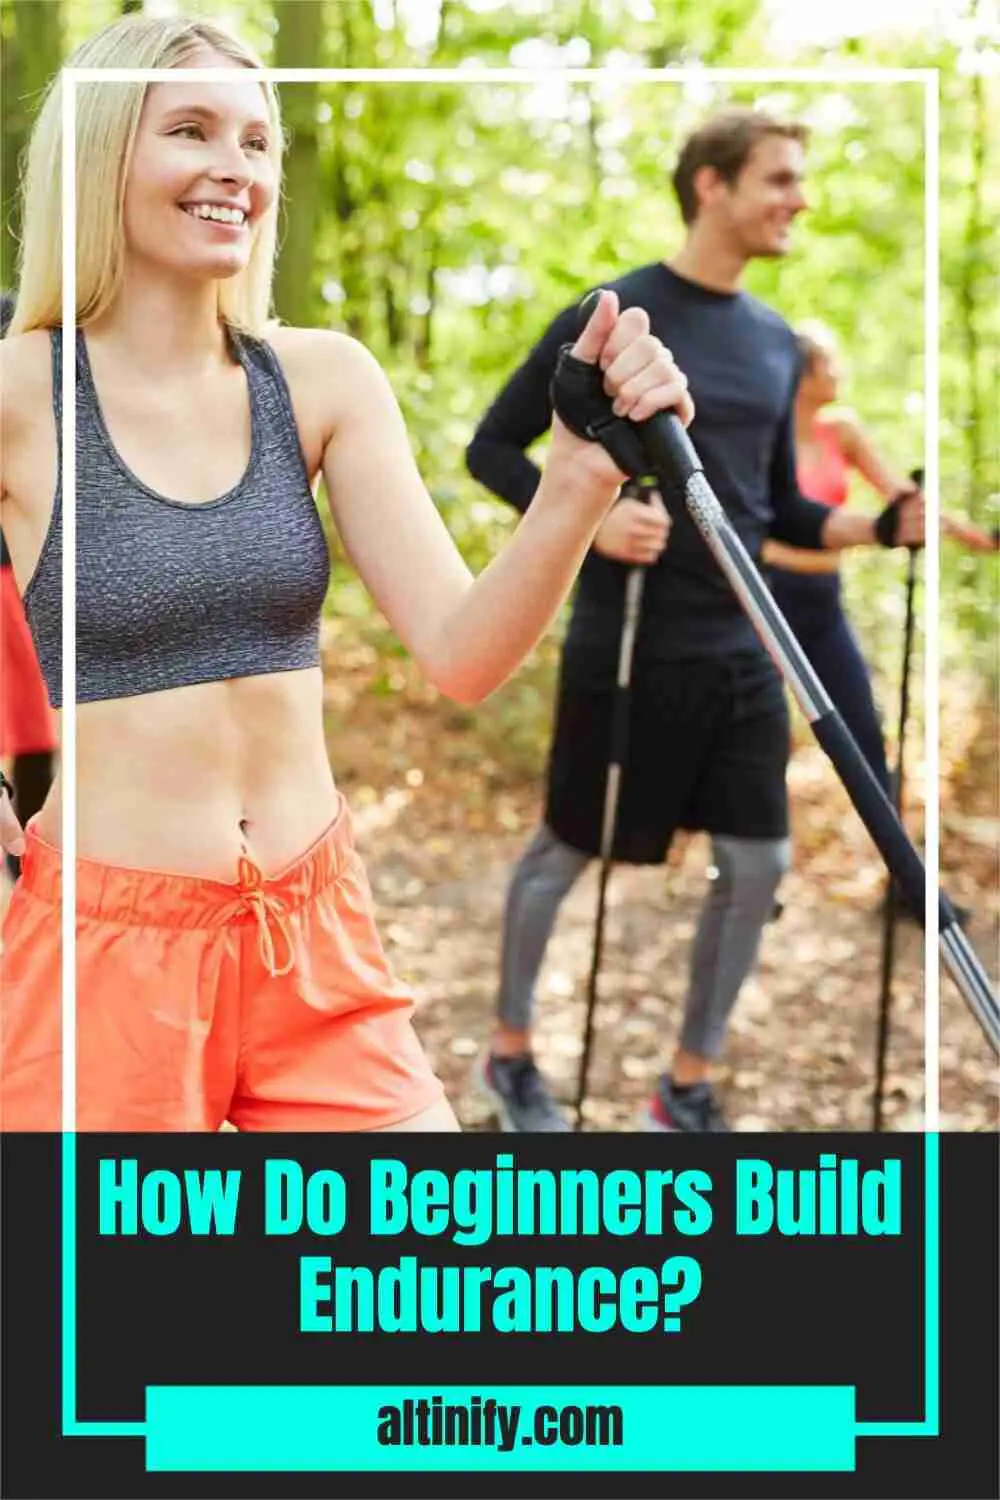 A Quick Guide To Starting Endurance Training For Beginners